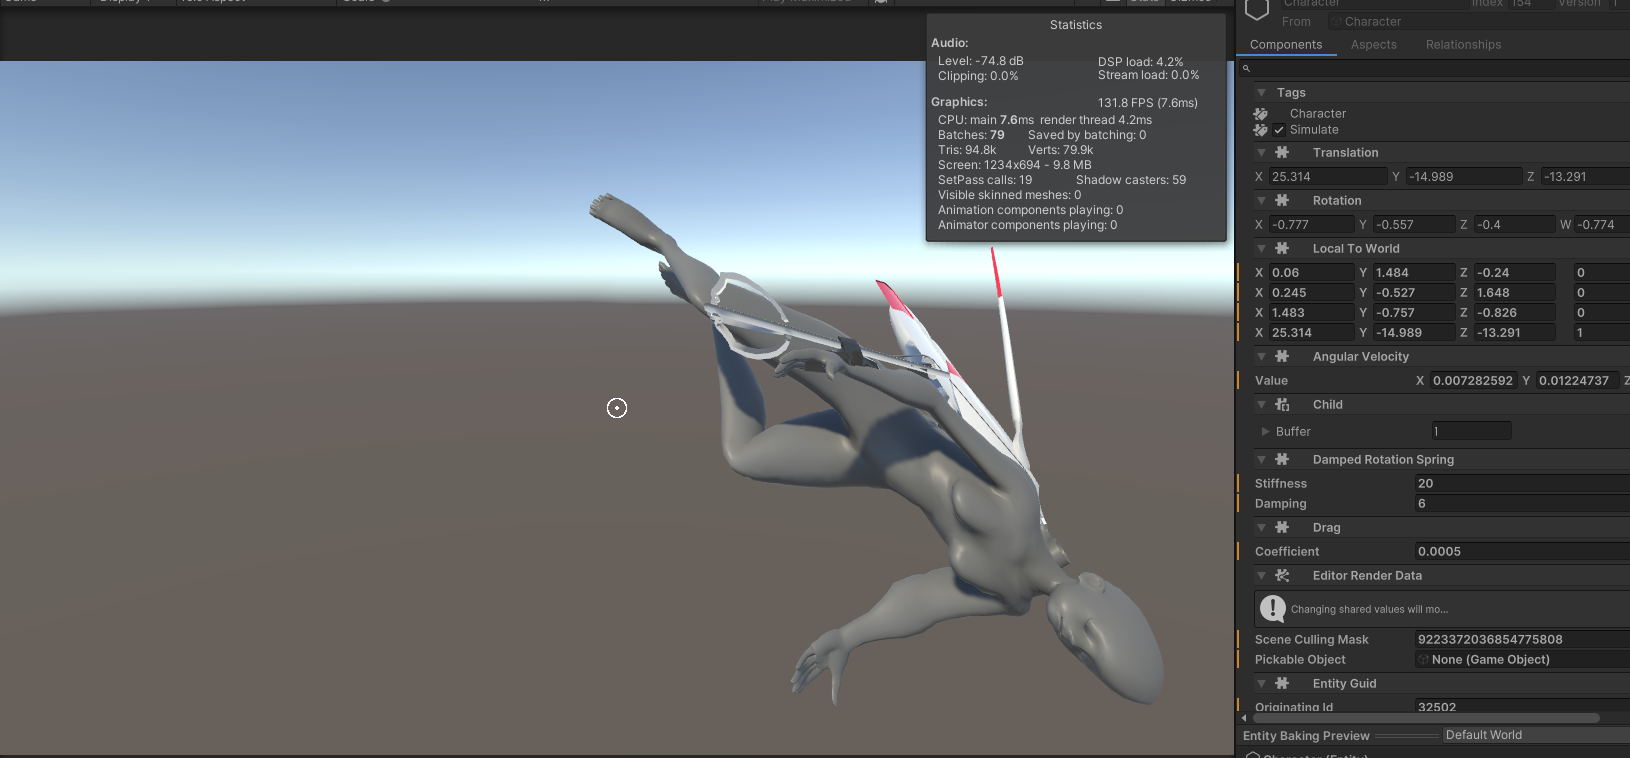 Screenshot of Unity Editor showing the doll character squashed and skewed, next to a display of the component values.